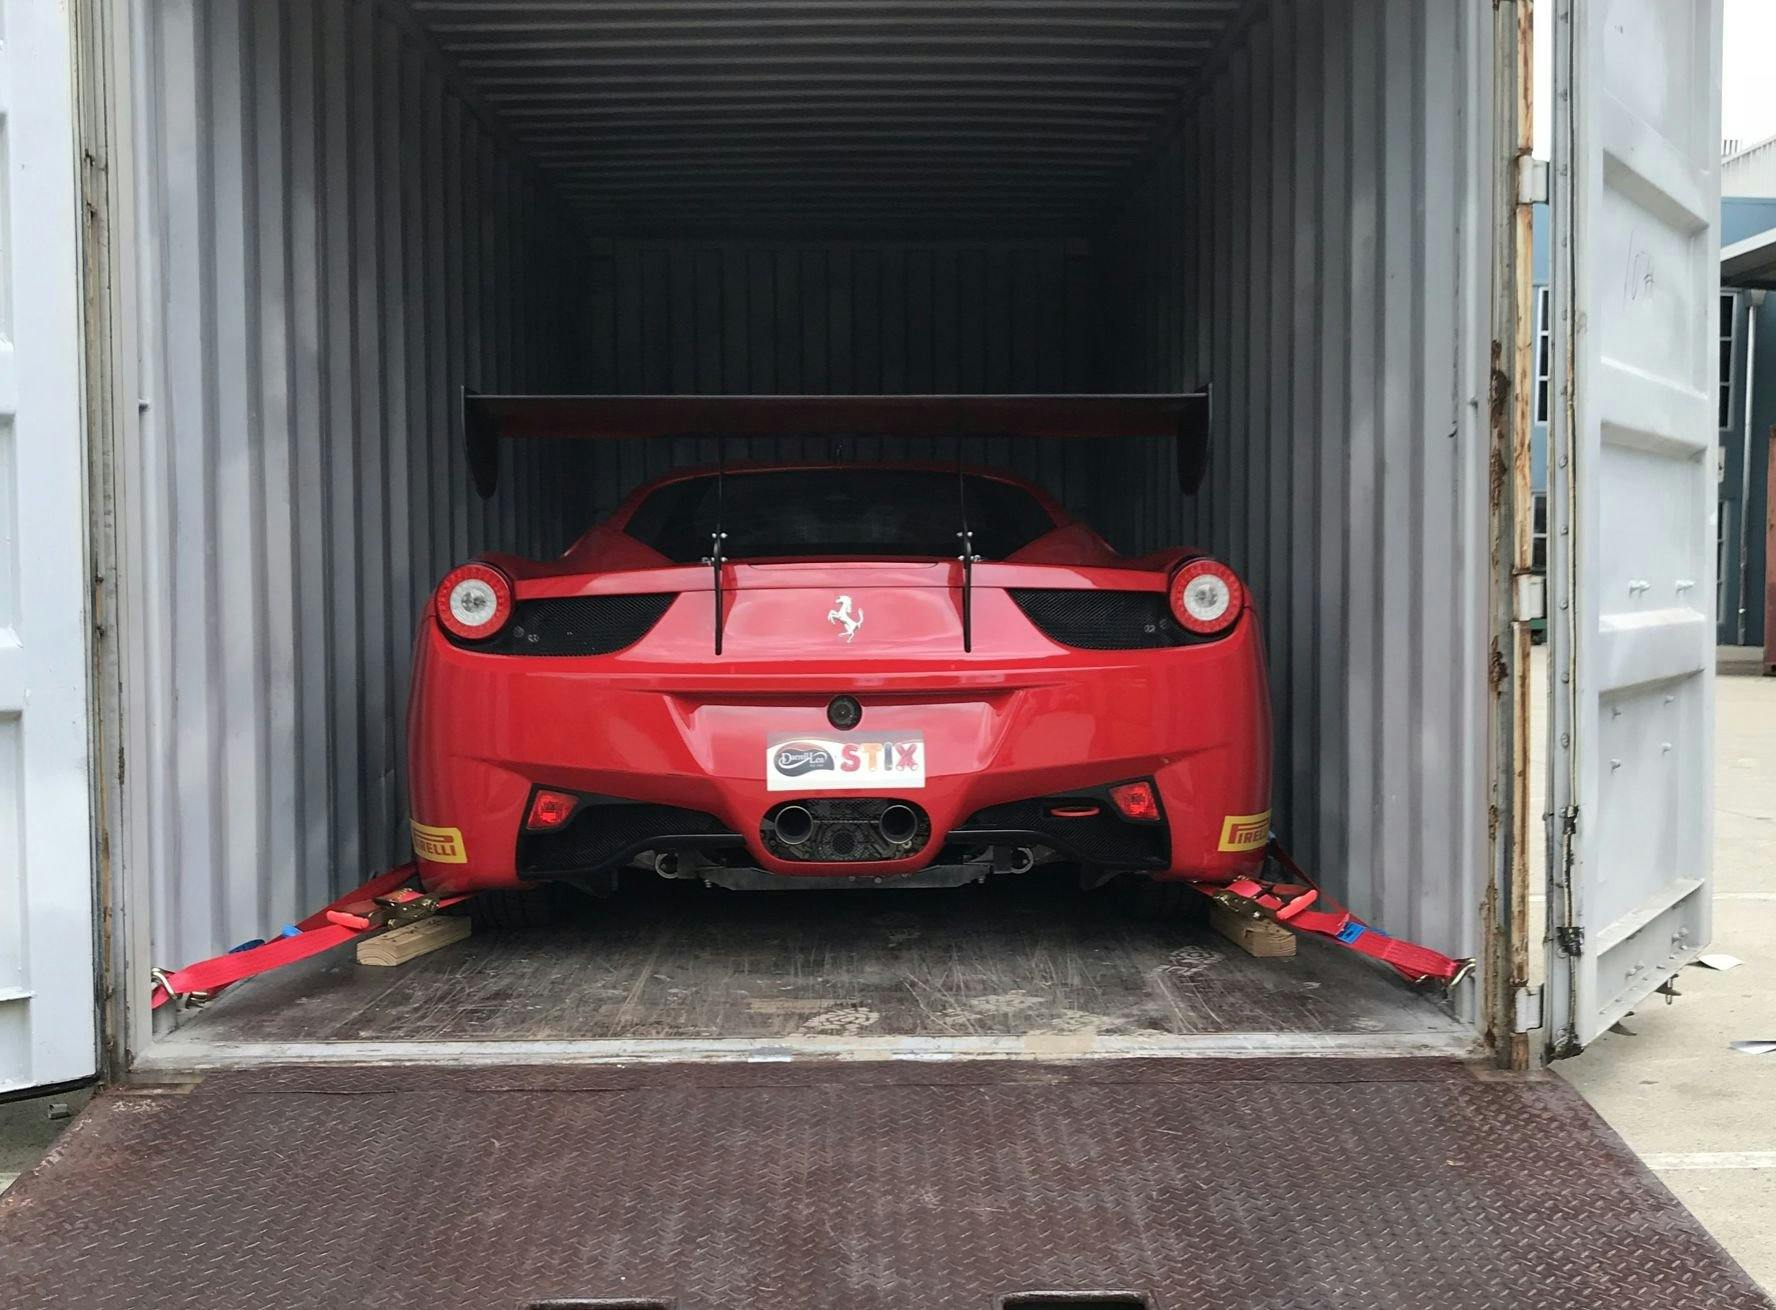 Car In Container image